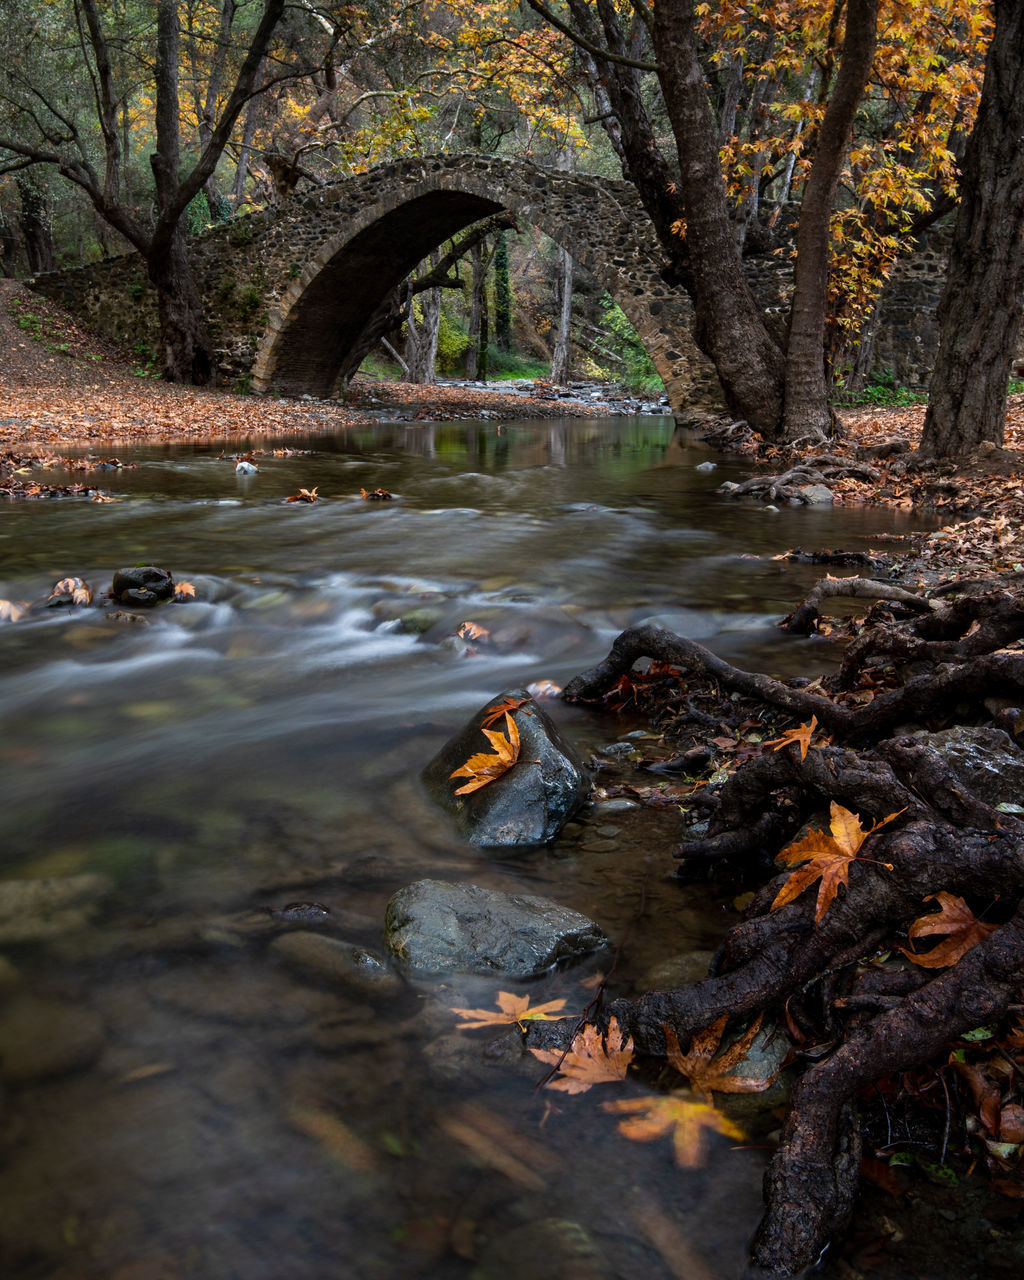 autumn, tree, water, river, nature, stream, leaf, plant, forest, wilderness, land, reflection, environment, no people, beauty in nature, plant part, creek, tranquility, outdoors, scenics - nature, woodland, day, landscape, flowing water, tree trunk, trunk, rock, tranquil scene, body of water, non-urban scene, animal, travel destinations